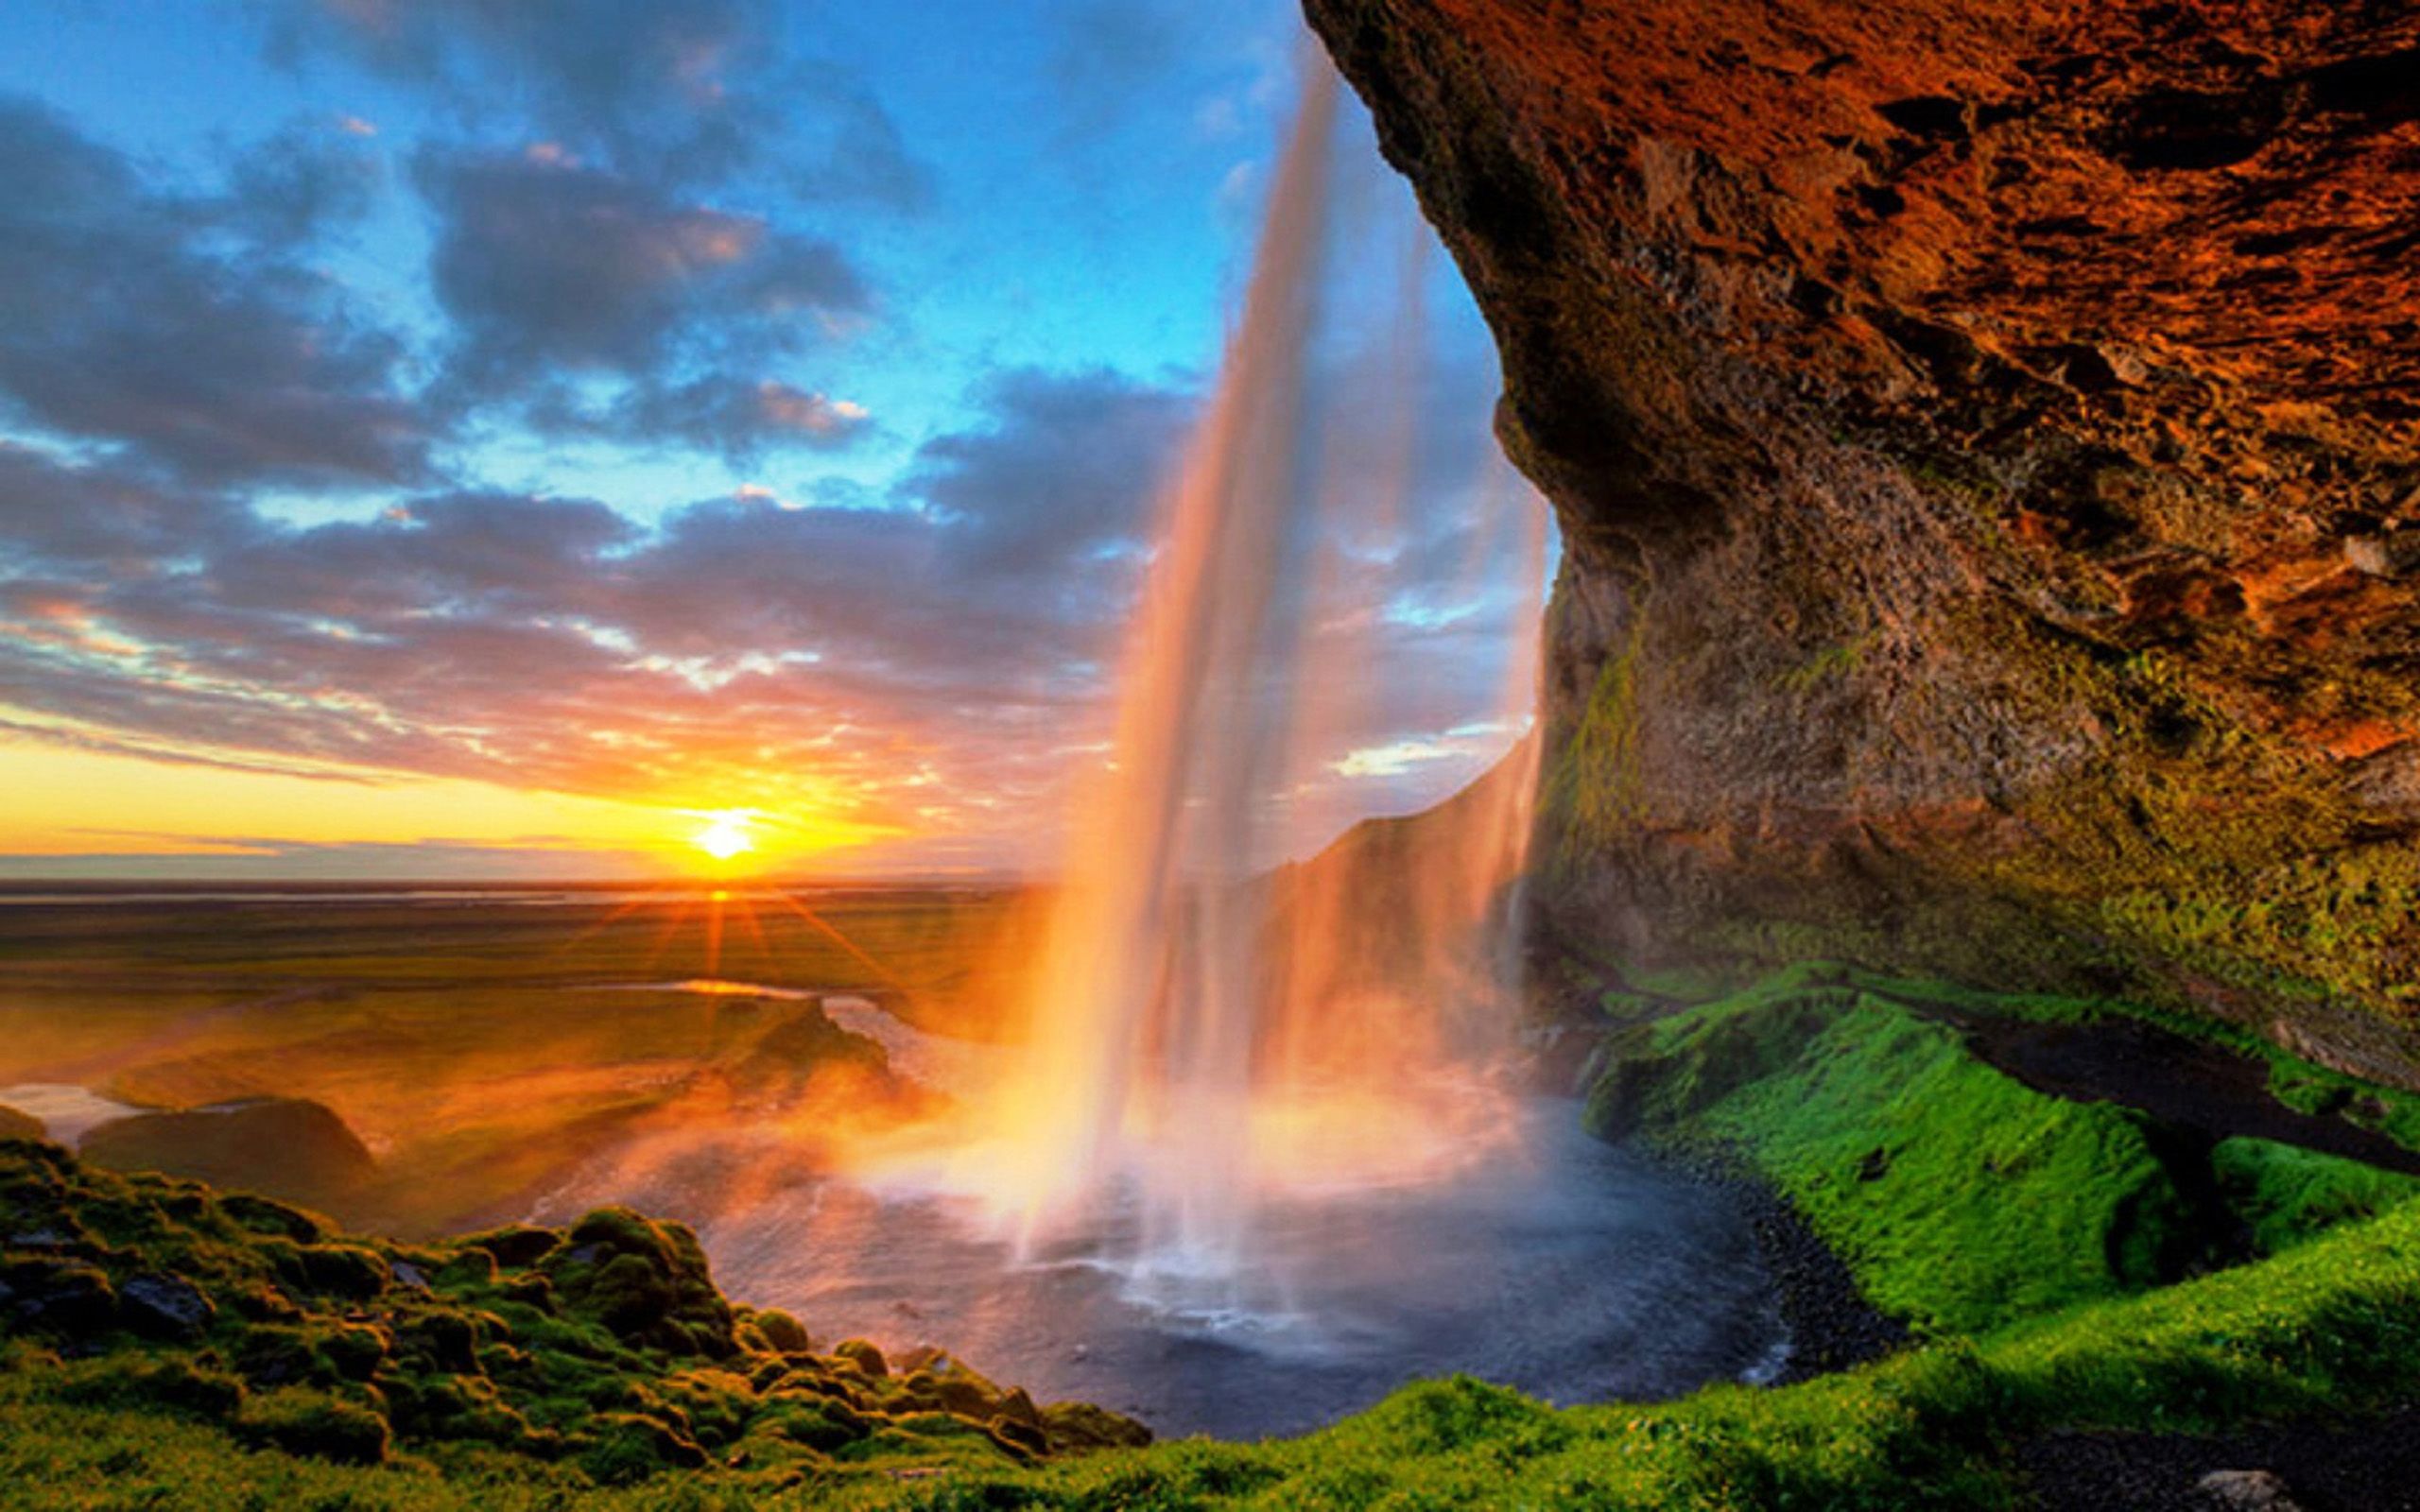 Seljalandsfoss Is One Of The Most Famous Waterfalls In Iceland 65 M High Desktop Background, Wallpaper13.com